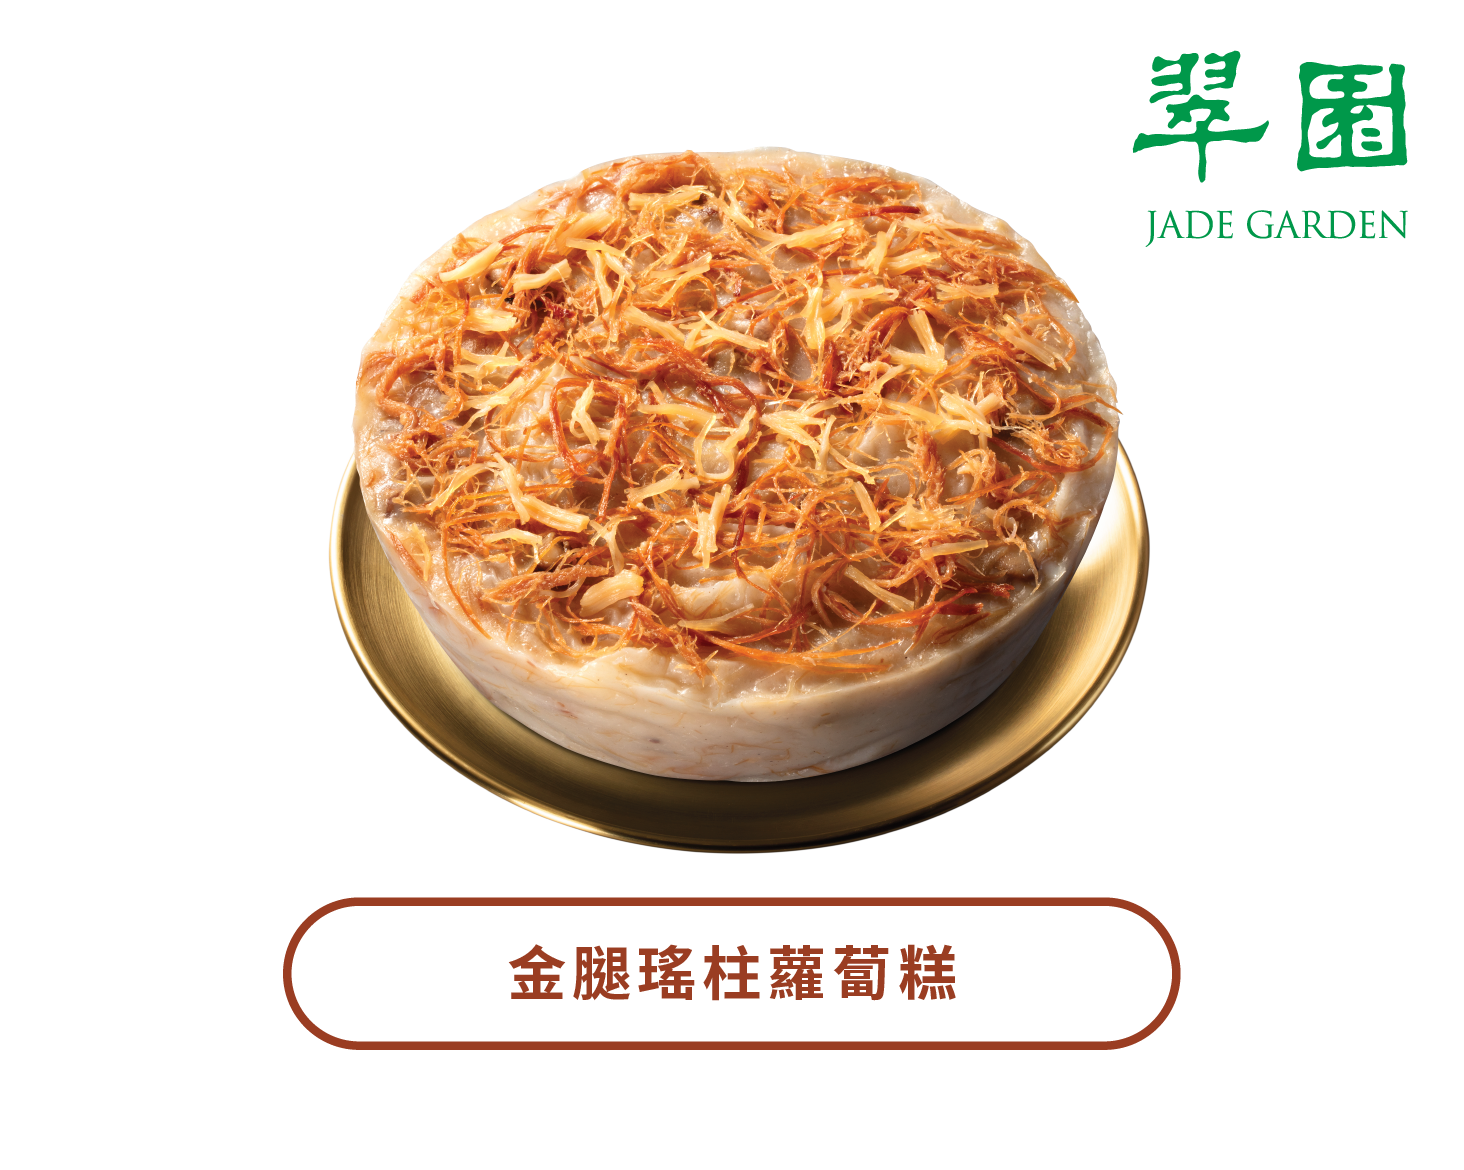 JADE GARDEN | Turnip Pudding with Ham and Conpoy (Physical Coupon)